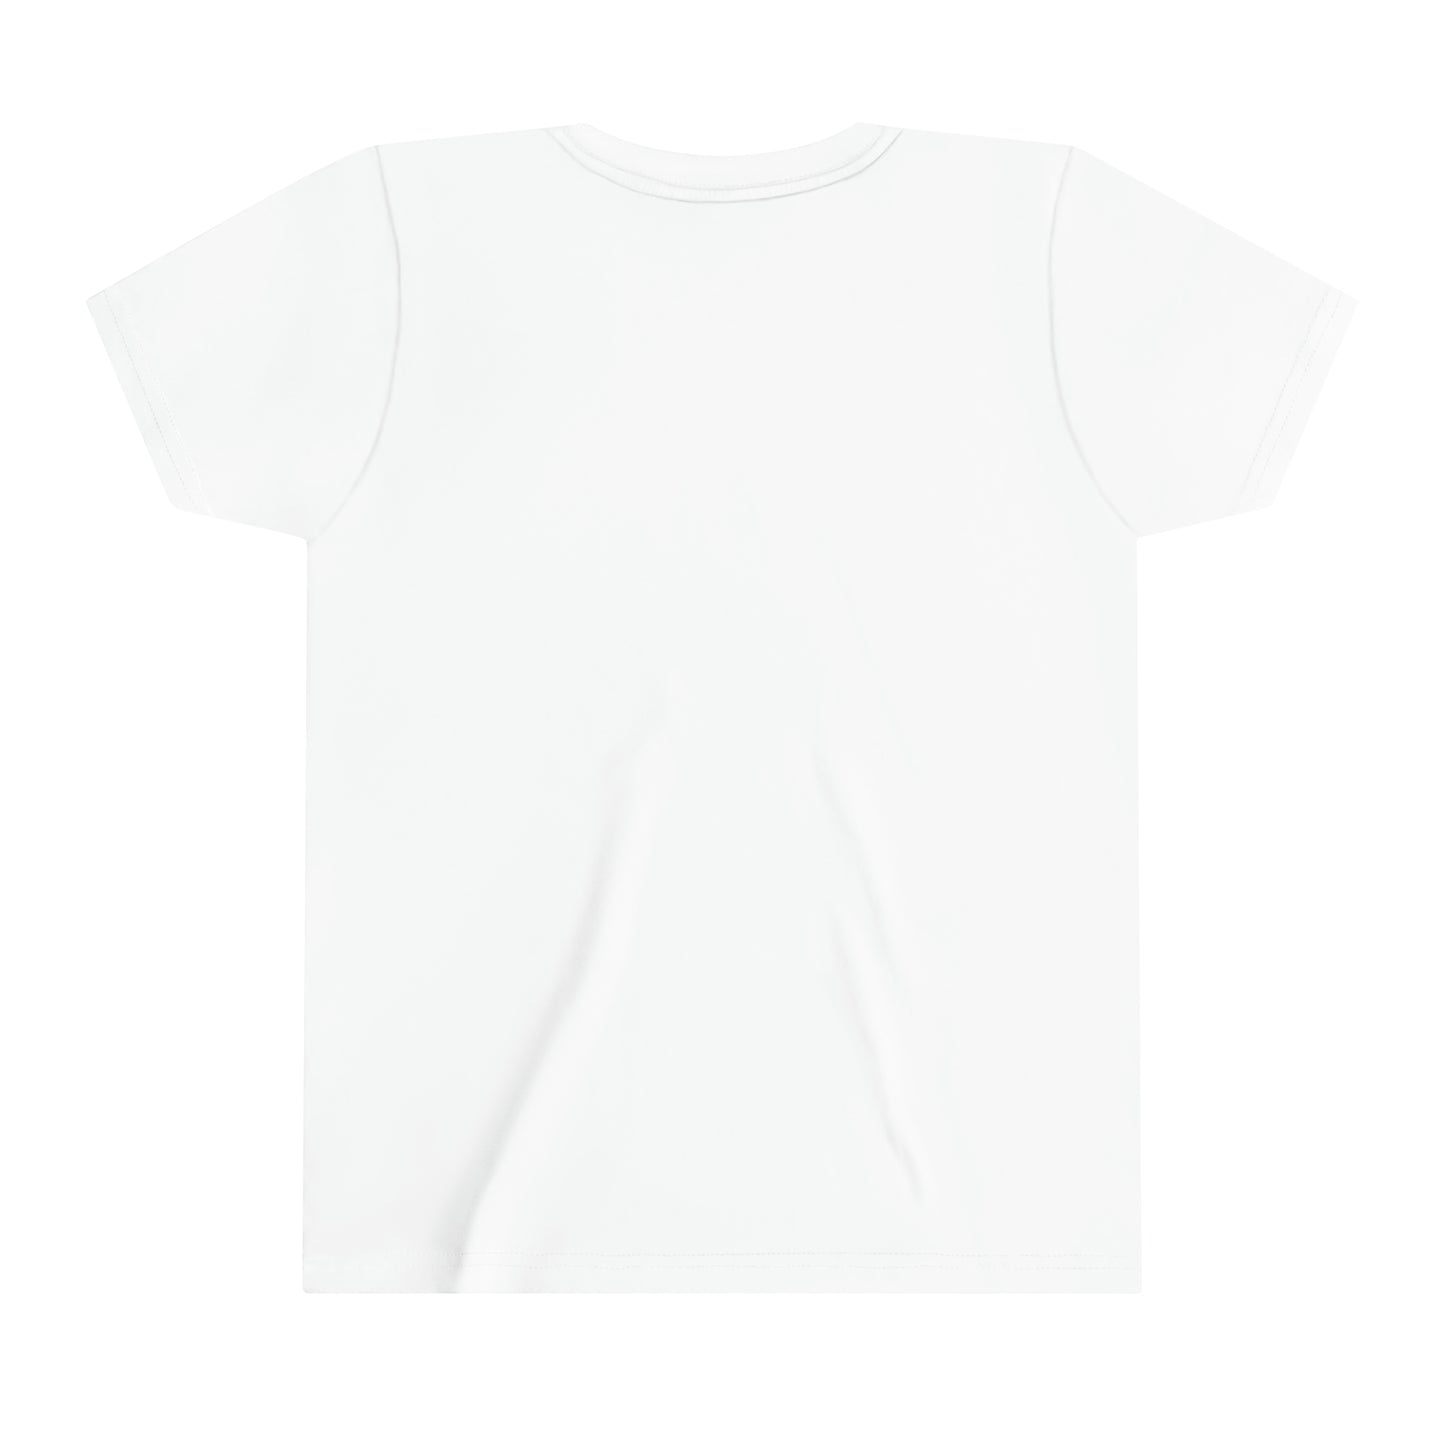 Who But God Youth Short Sleeve Tee